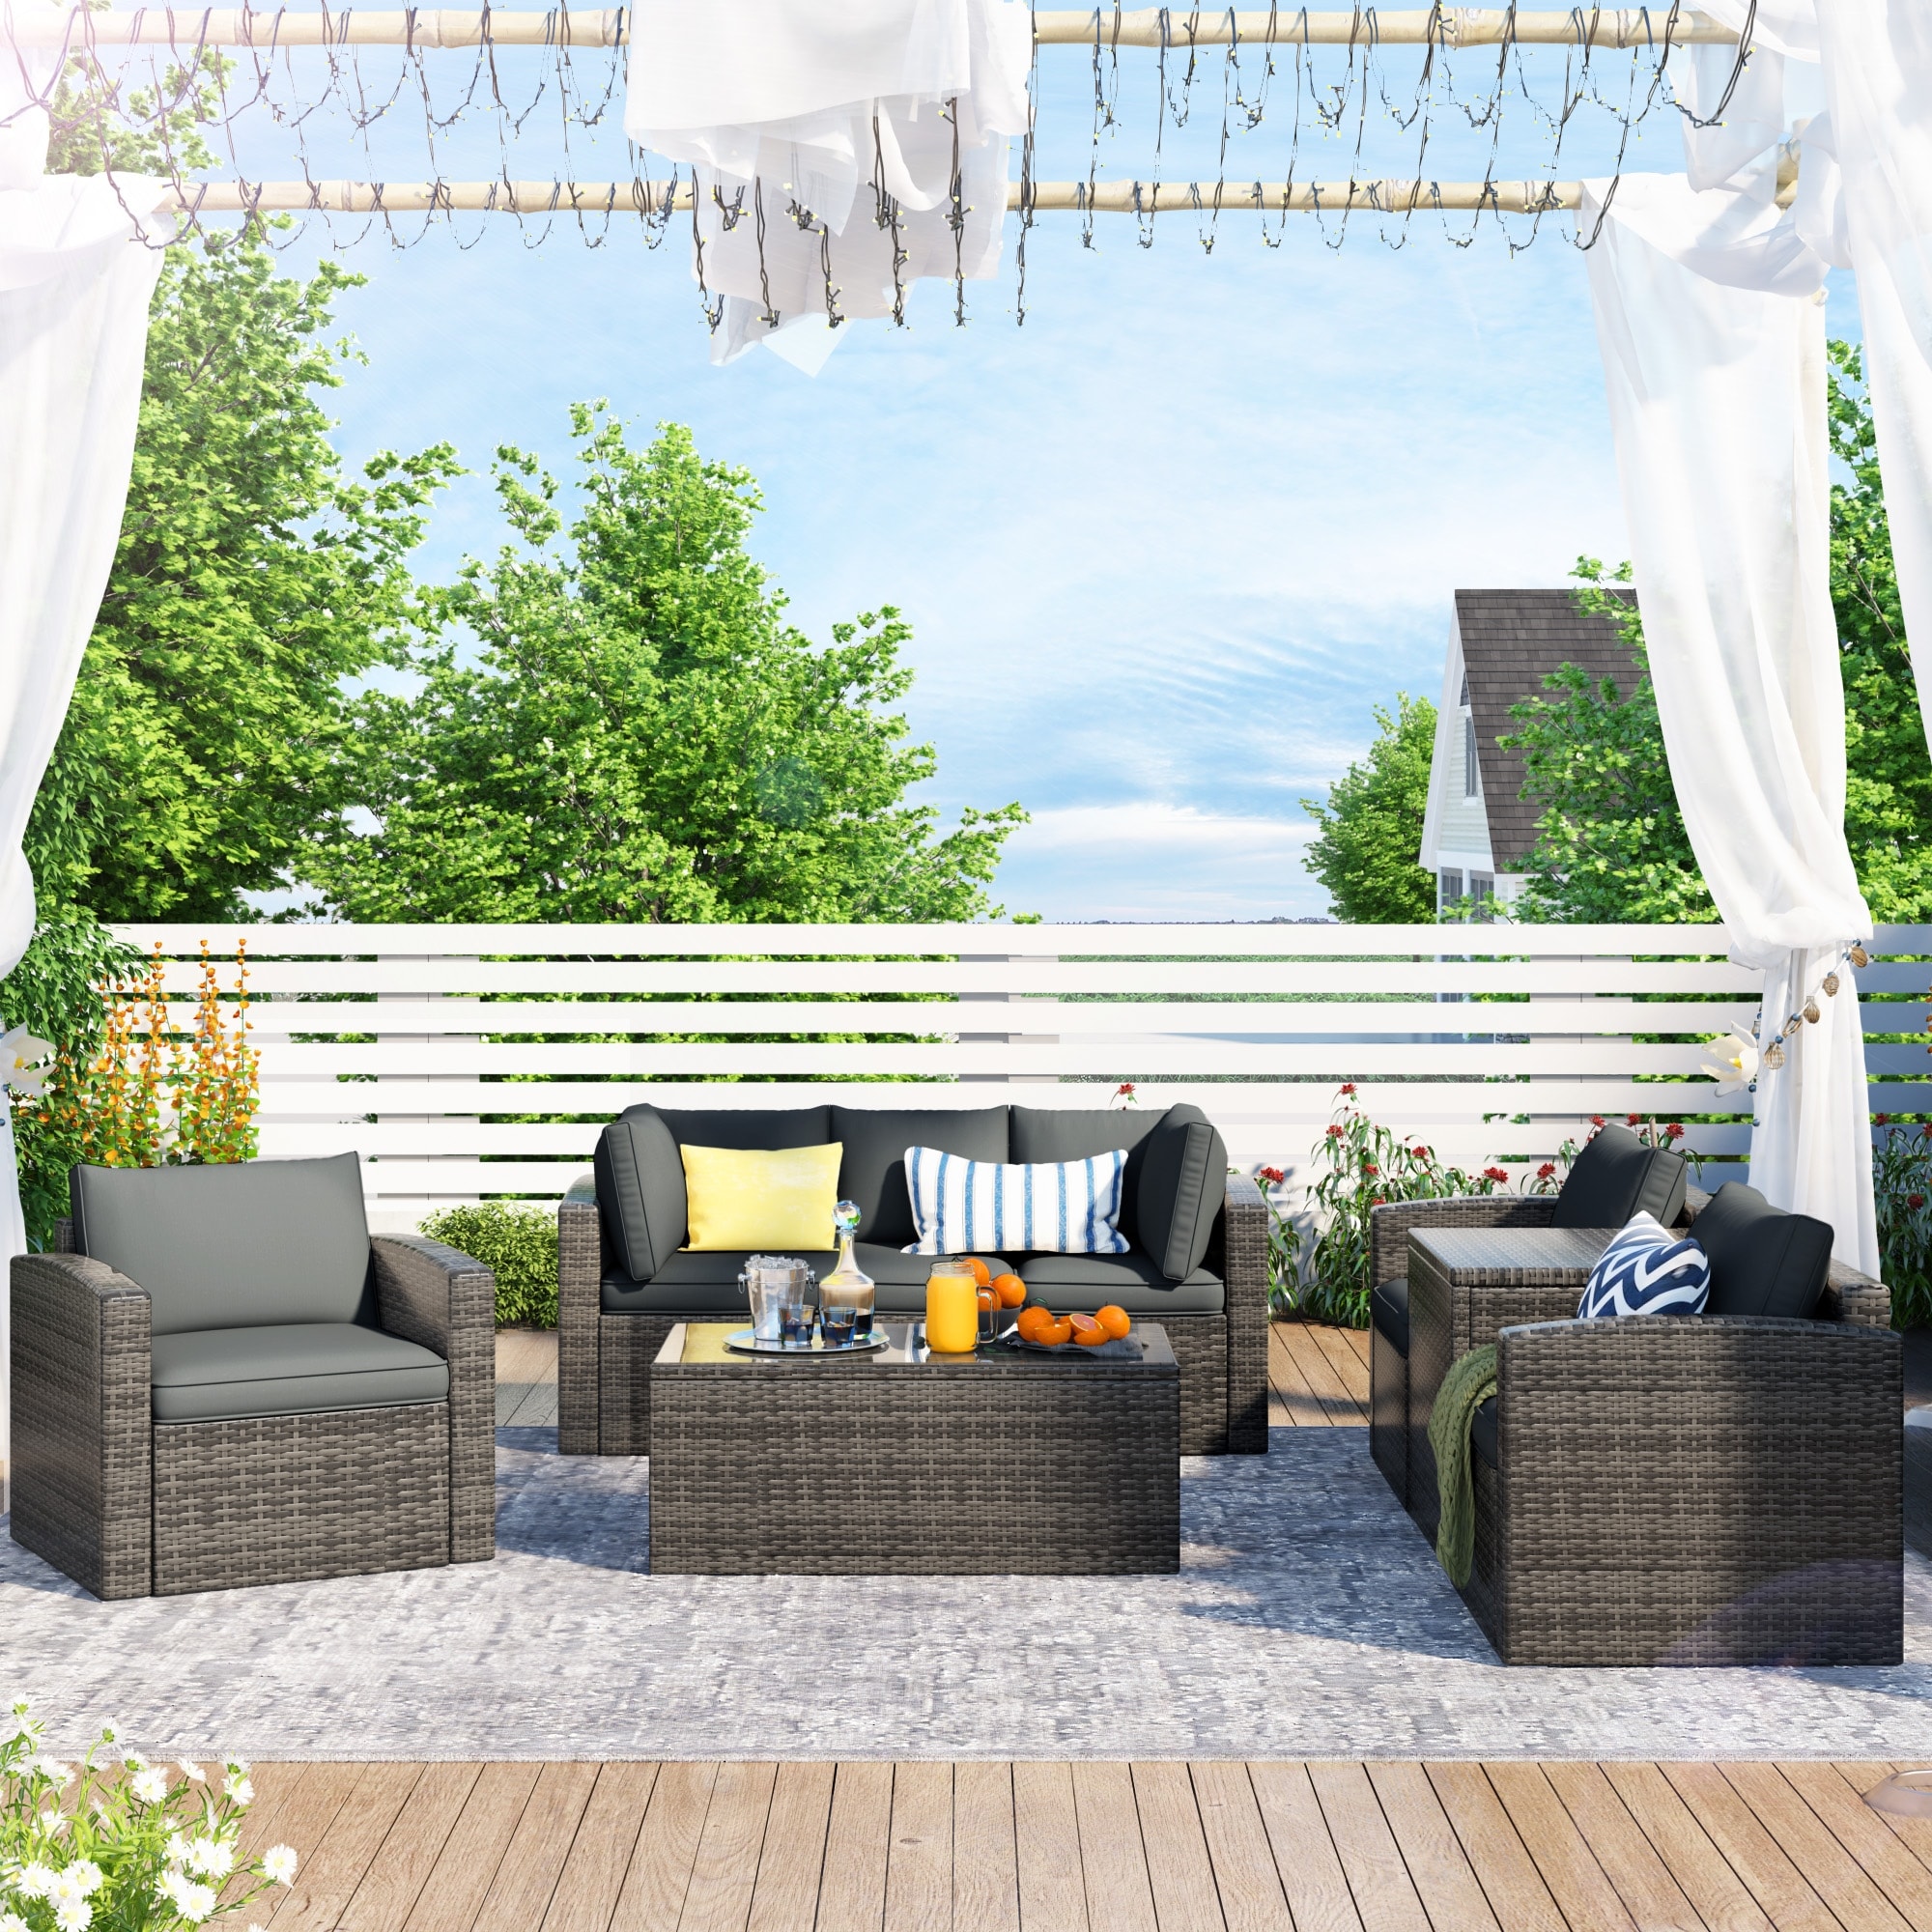 7-piece Pe Rattan Sofa Set With Glass Table And Storage